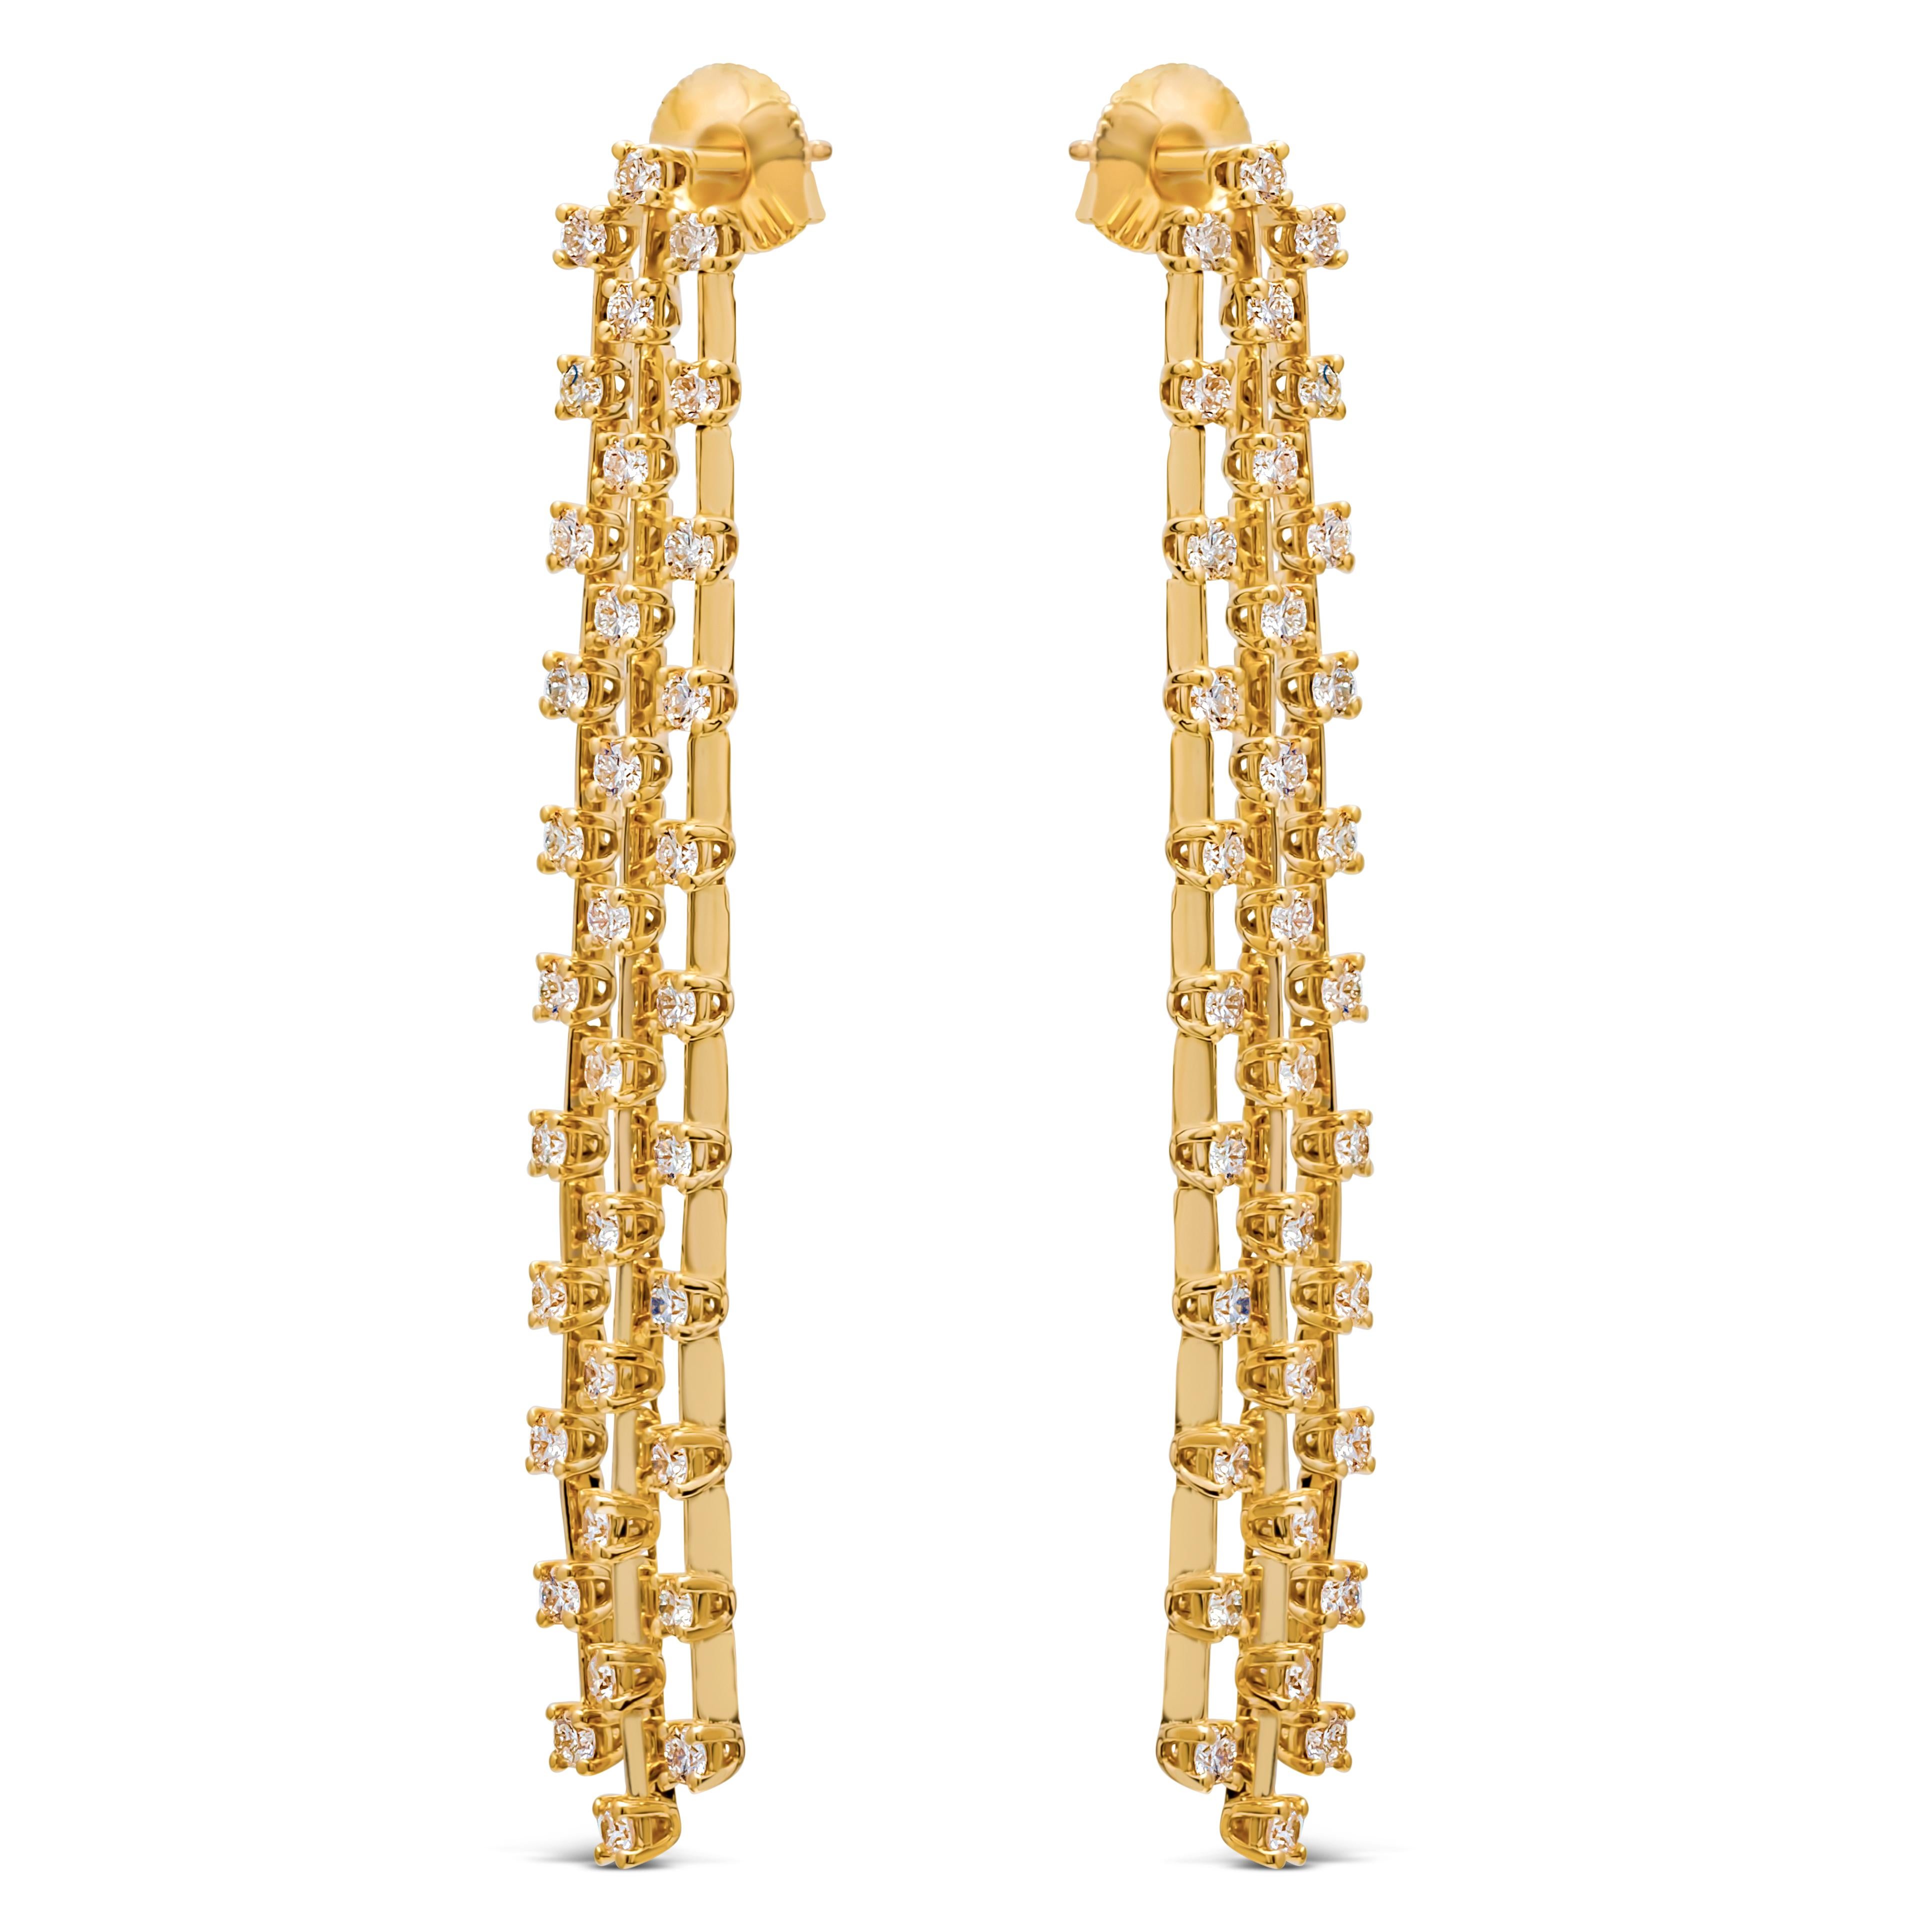 This versatile and stylish chandelier earrings showcasing Three-rows of brilliant round diamonds set in an elegant chandelier waterfall design and classic four prong basket setting. Finely made in 14k yellow gold. Diamonds weigh 3.10 carats total